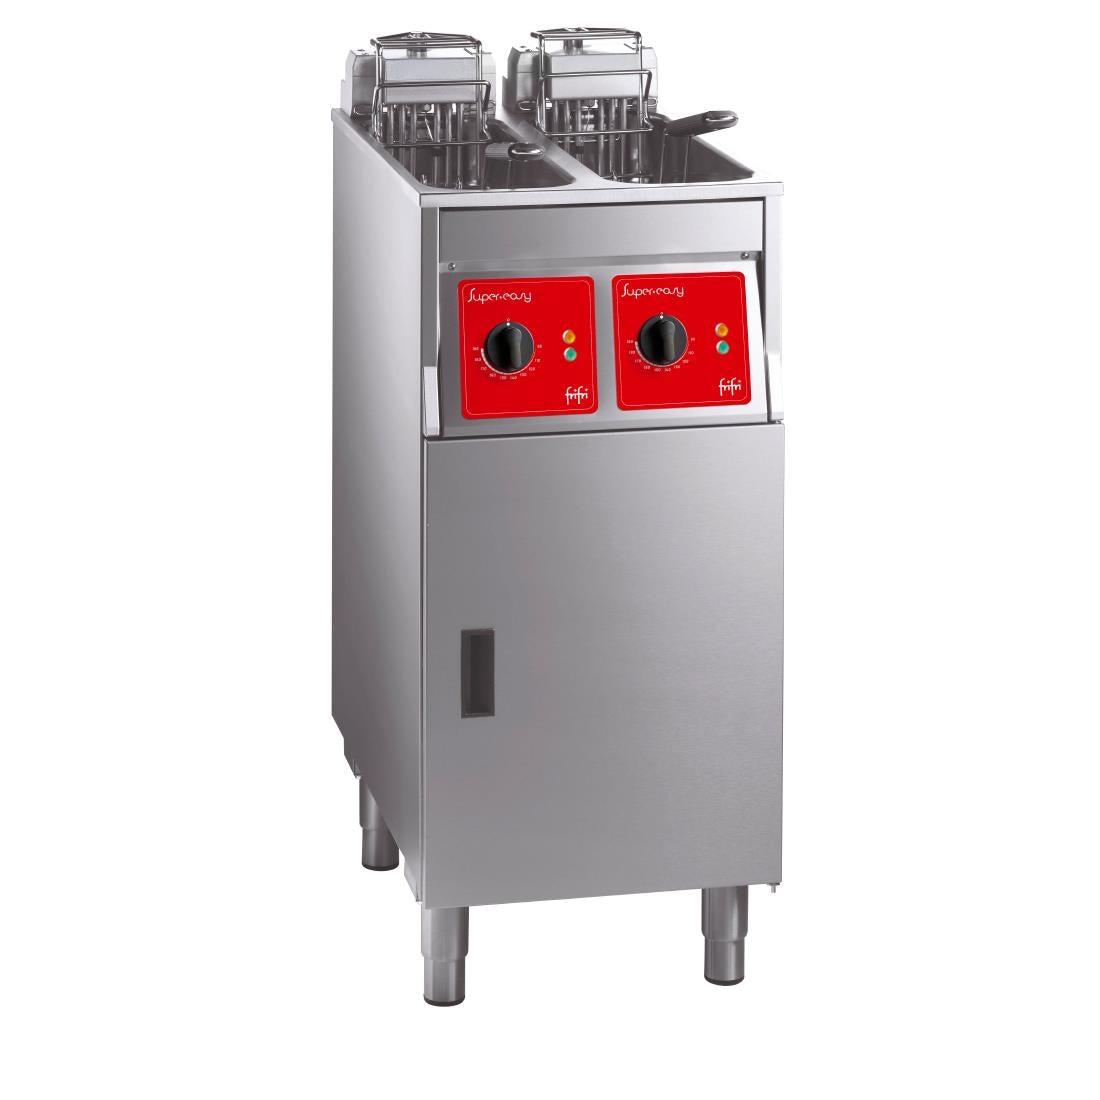 HS065-3PH FriFri Super Easy 422 Electric Free-Standing Twin Tank Fryer with Filtration 2 Baskets 2x 11kW - Three Phase